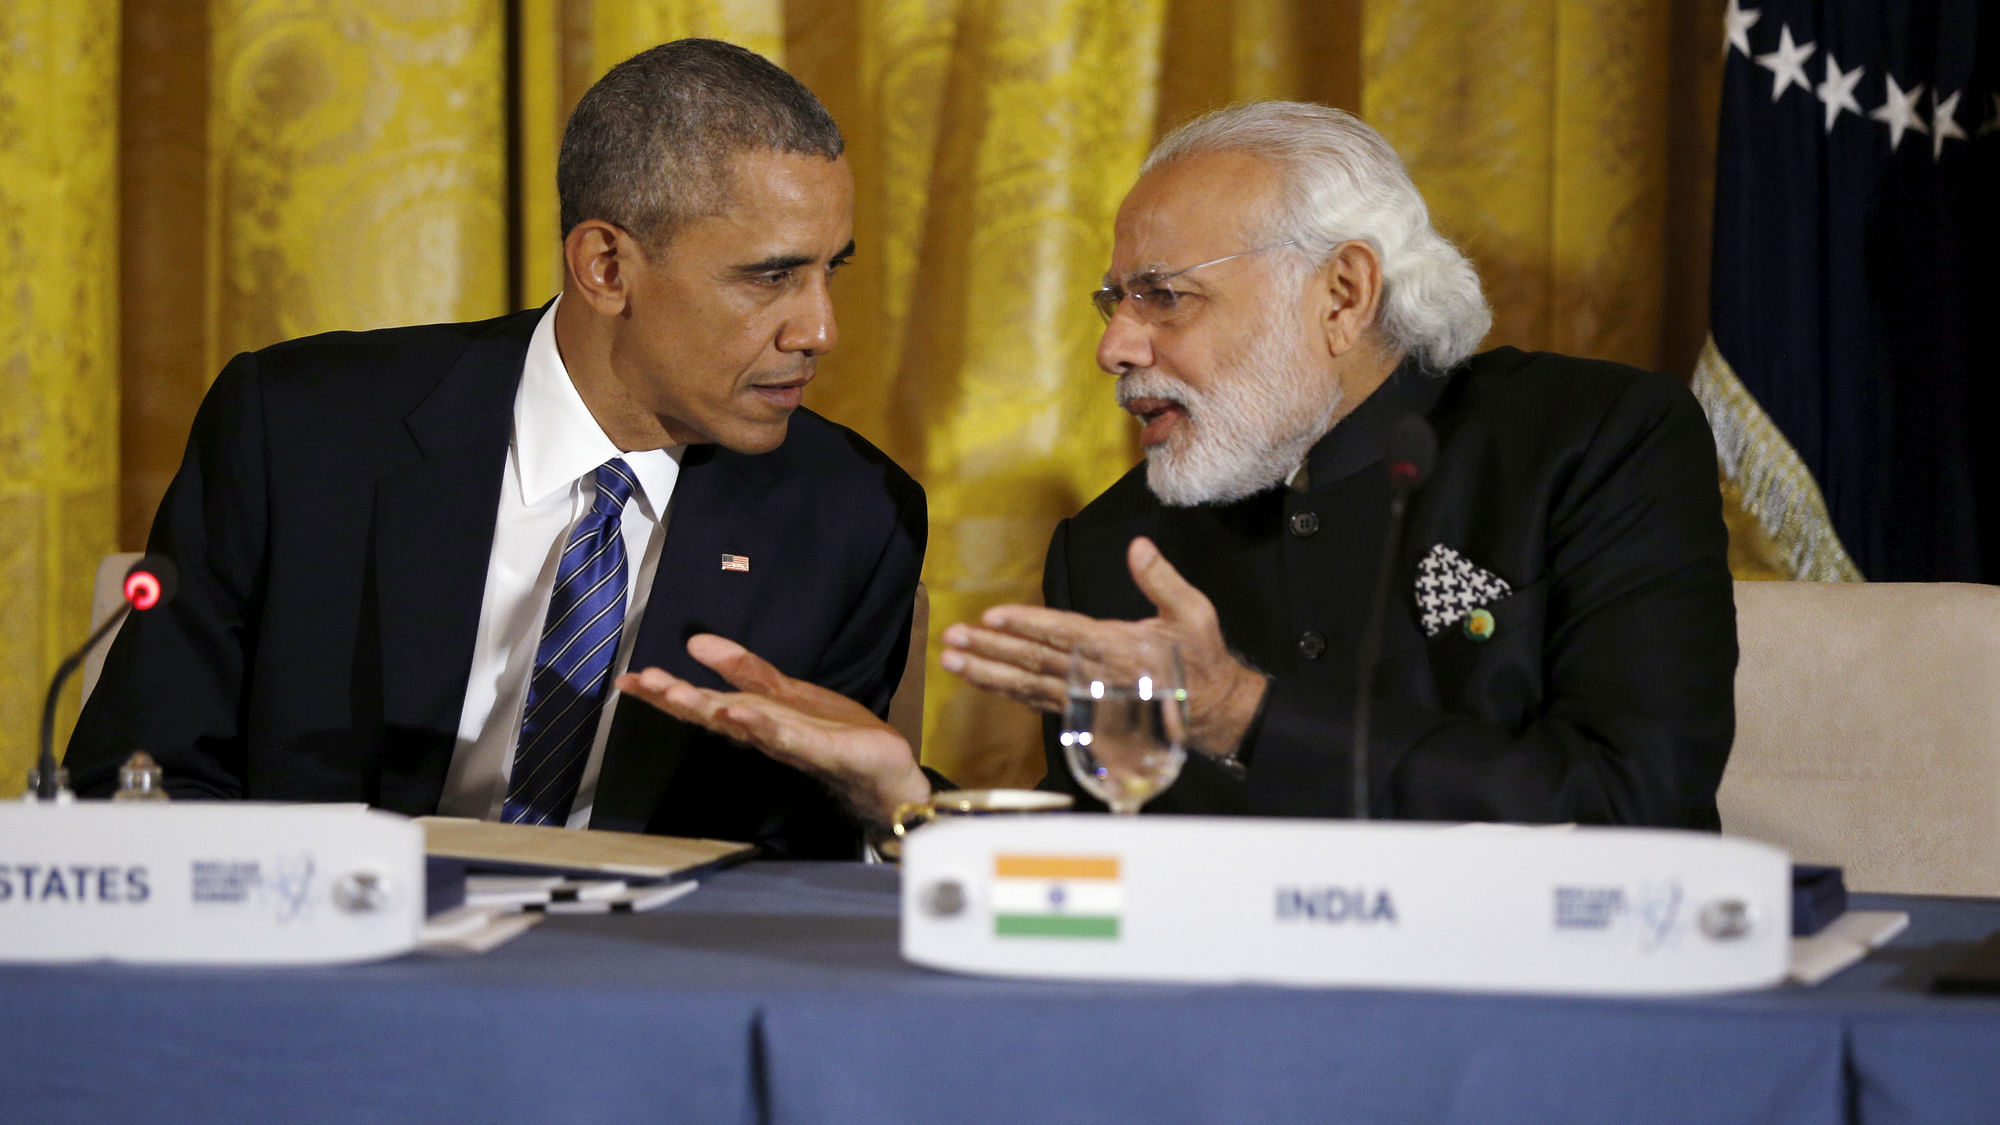 US President Barack Obama talks with Prime Minister Narendra Modi (R) during a working dinner at the White House. (Photo: Reuters)